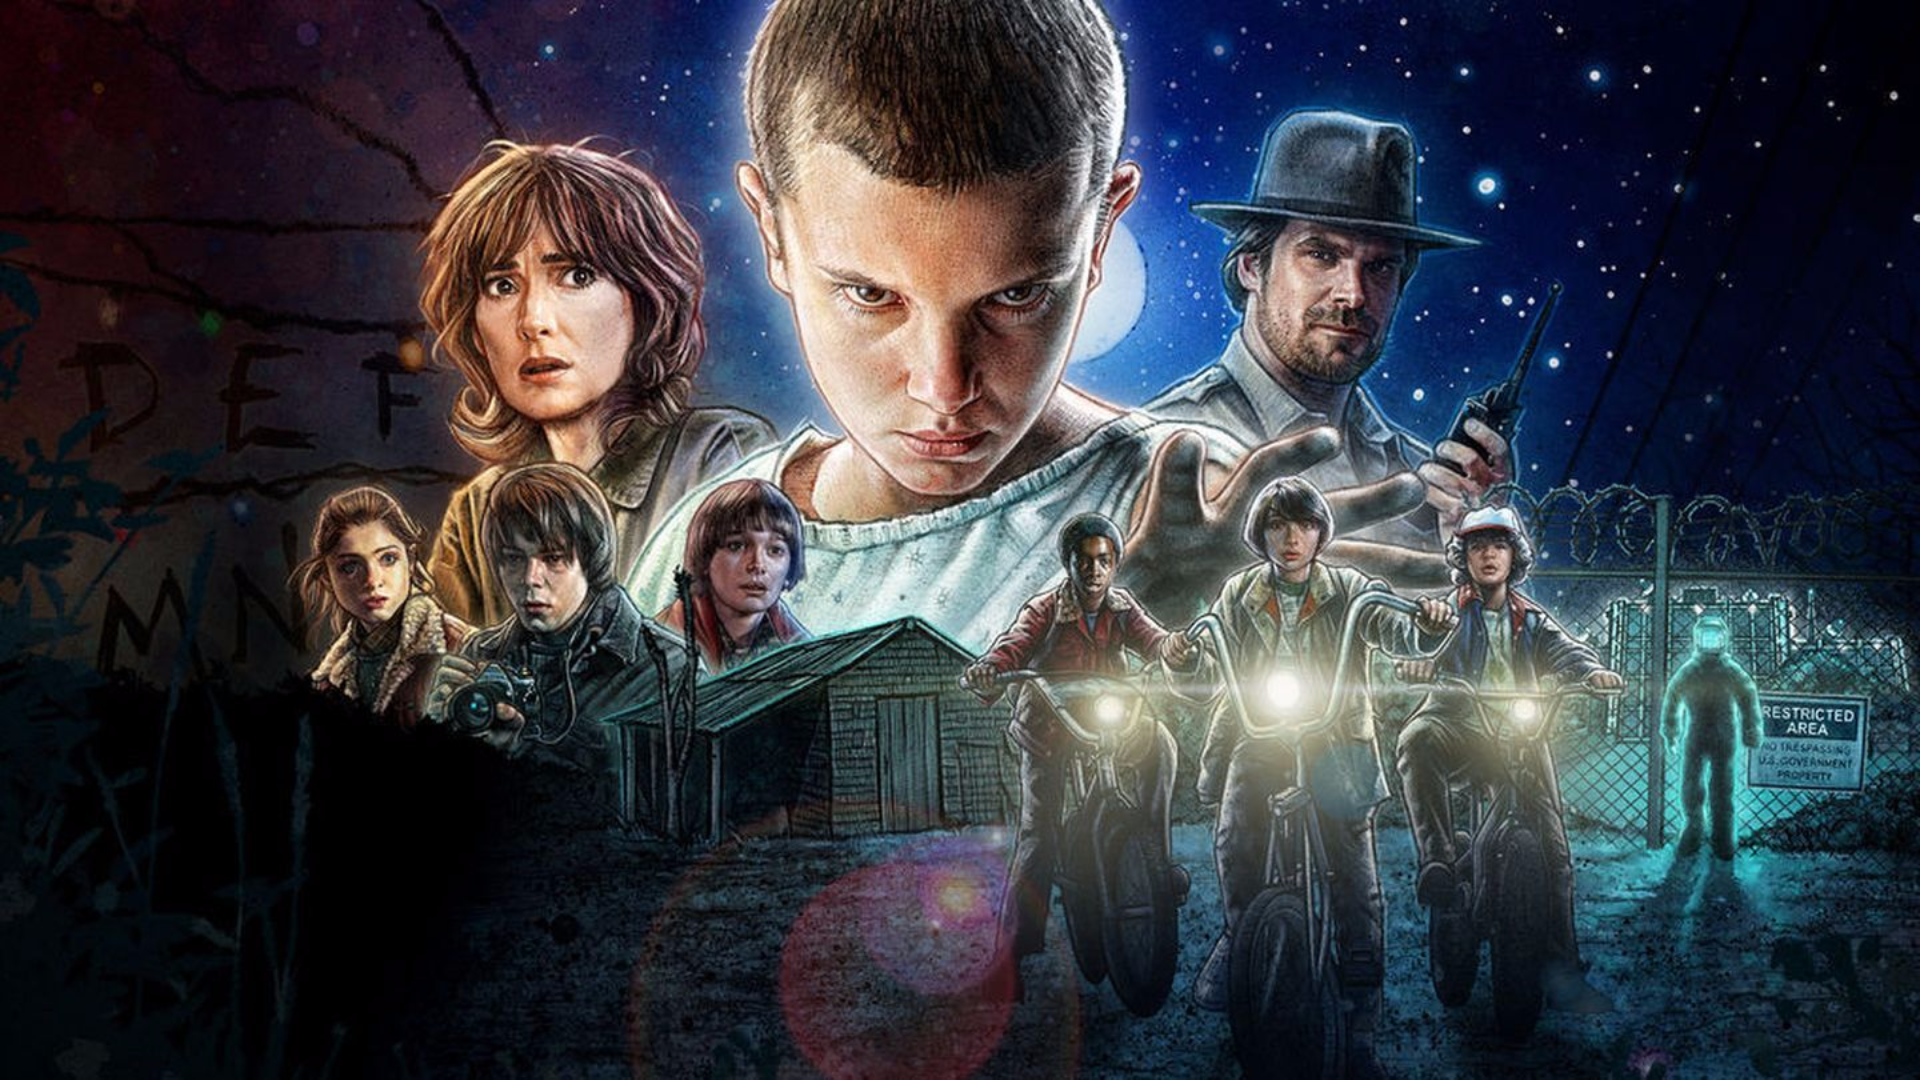 260+ Stranger Things HD Wallpapers and Backgrounds